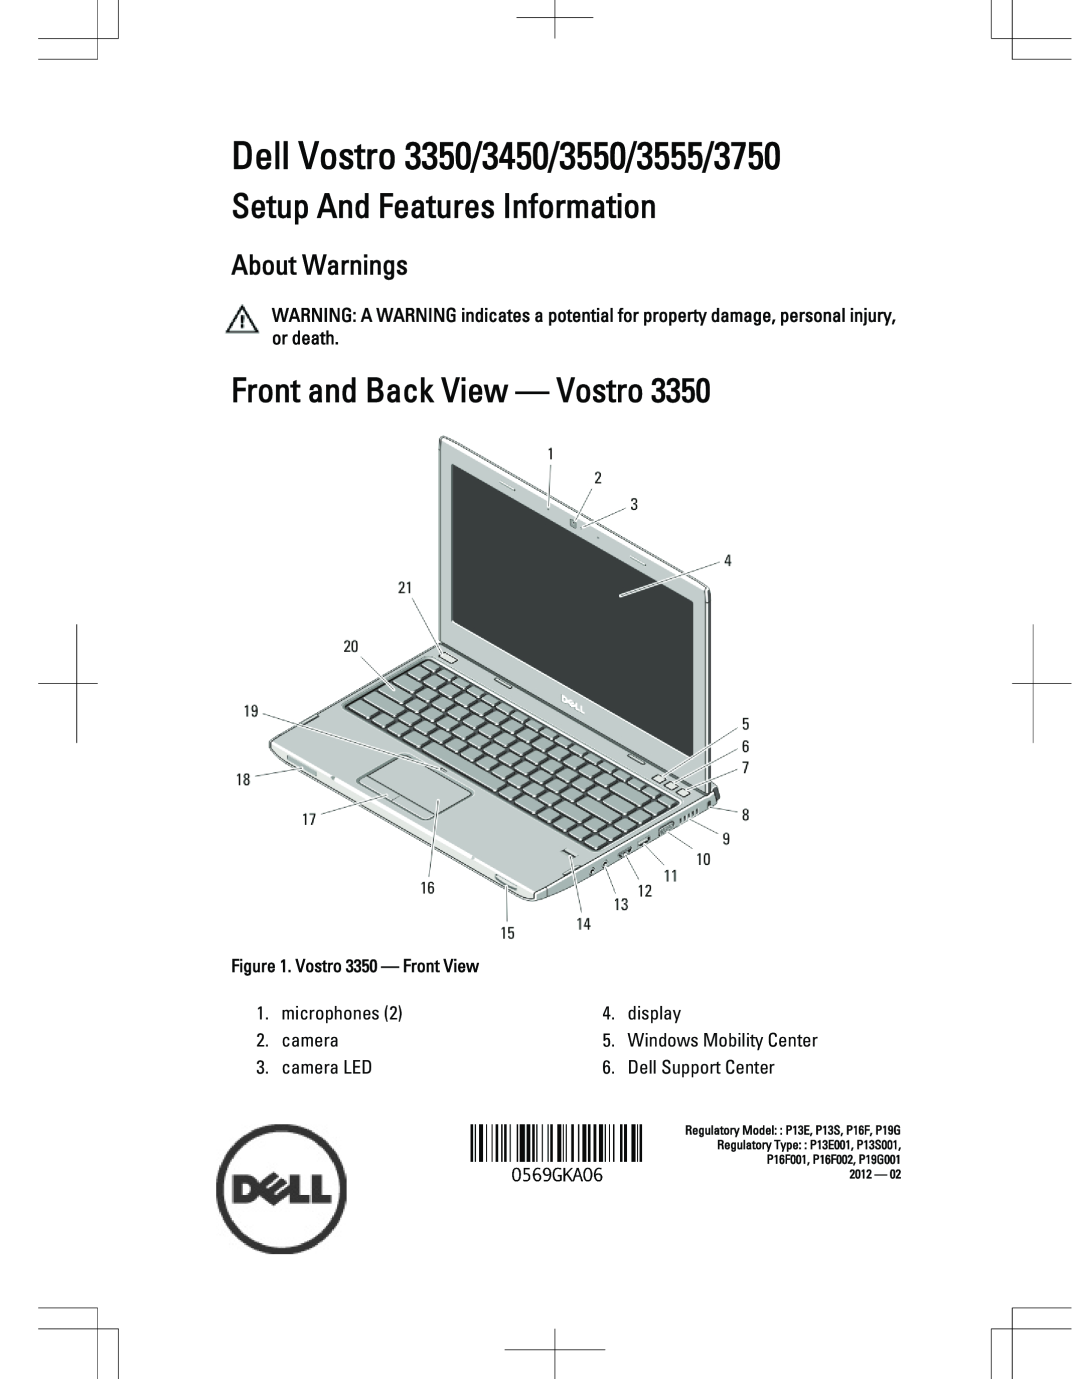 Dell manual Setup And Features Information, Front and Back View - Vostro, Dell Vostro 3350/3450/3550/3555/3750 